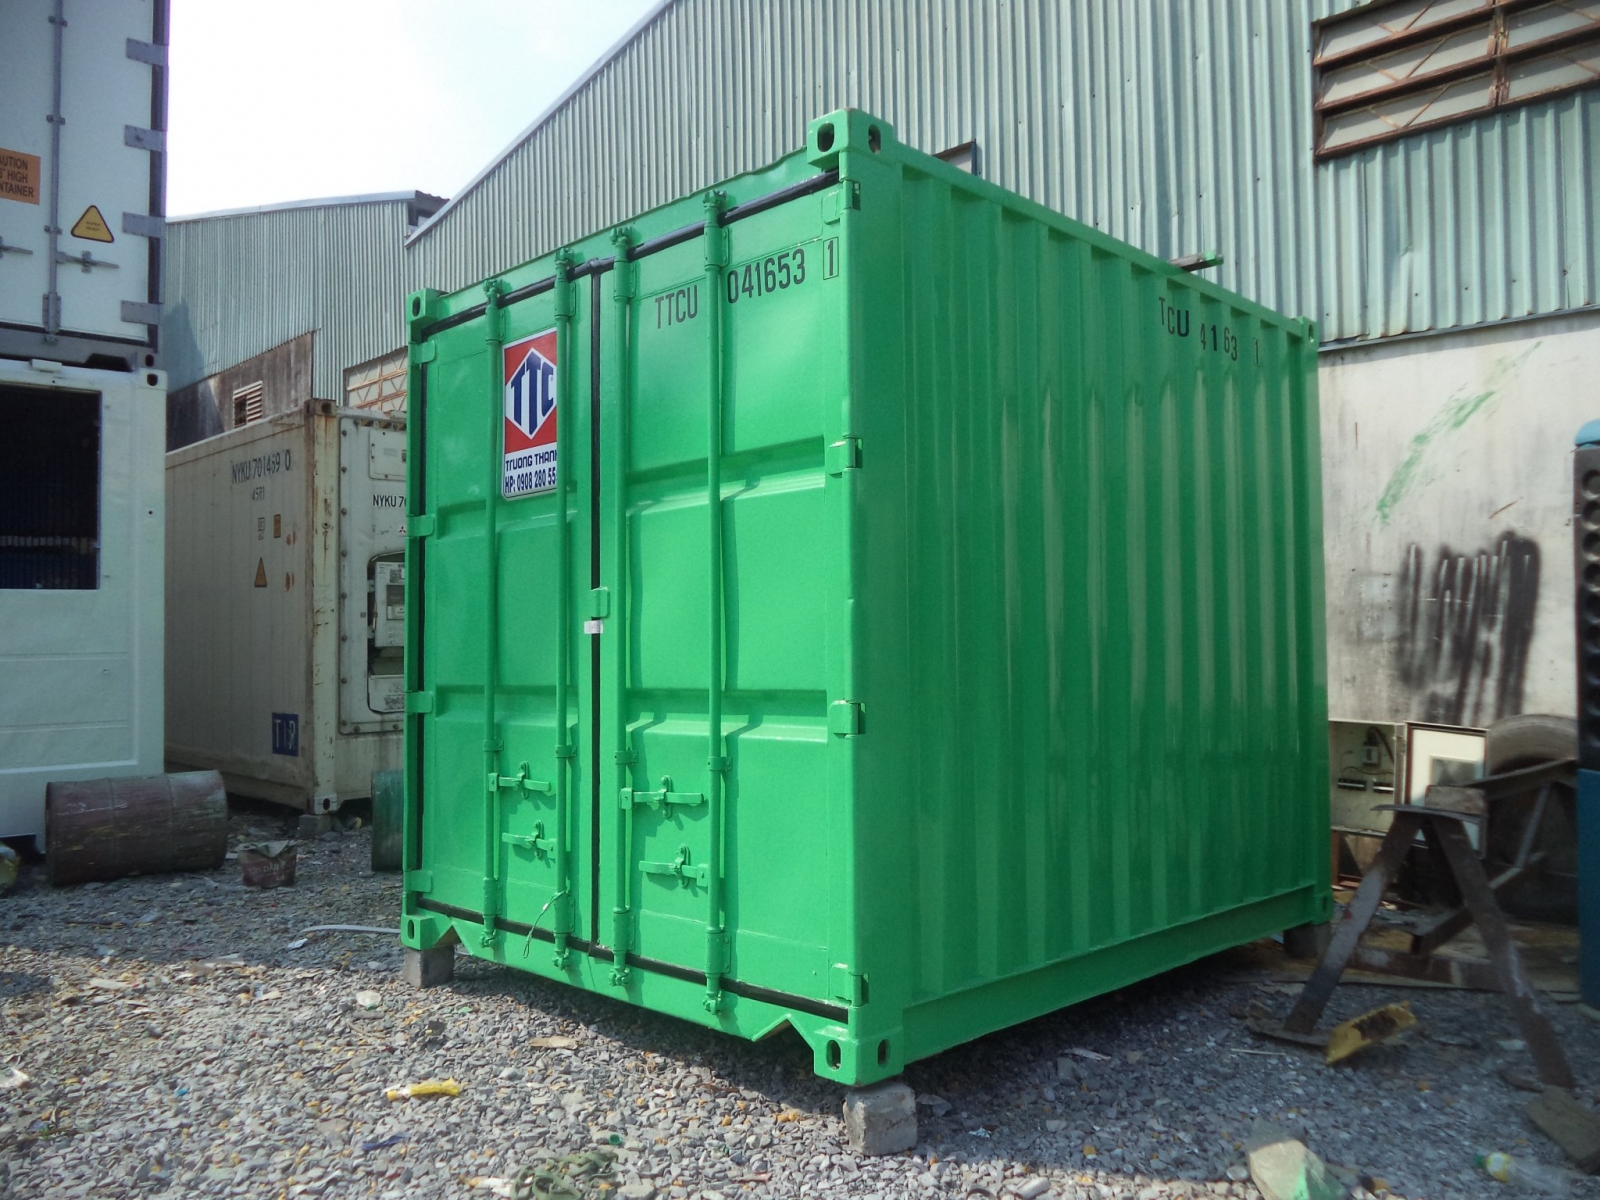 Mua container giá rẻ